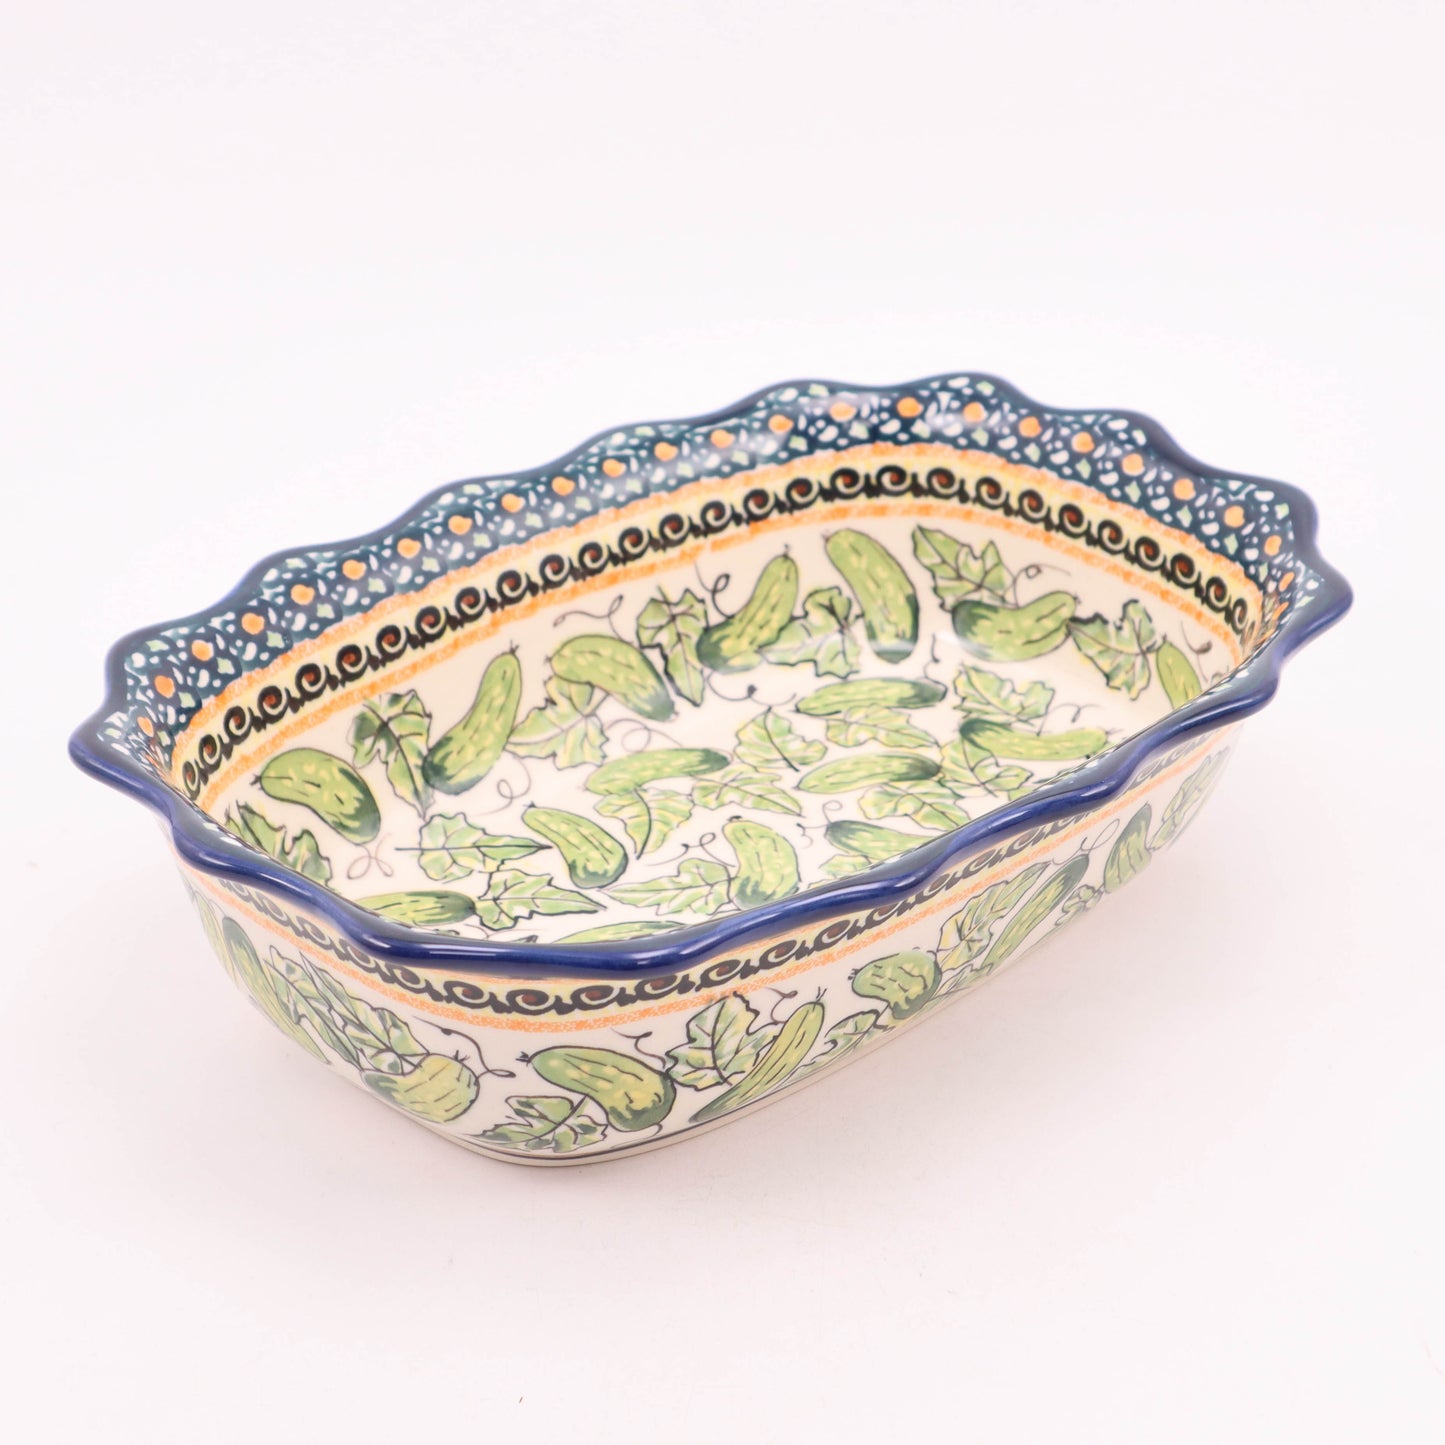 11.5"x8" Ruffled Oval Bowl. Pattern: In a Pickle